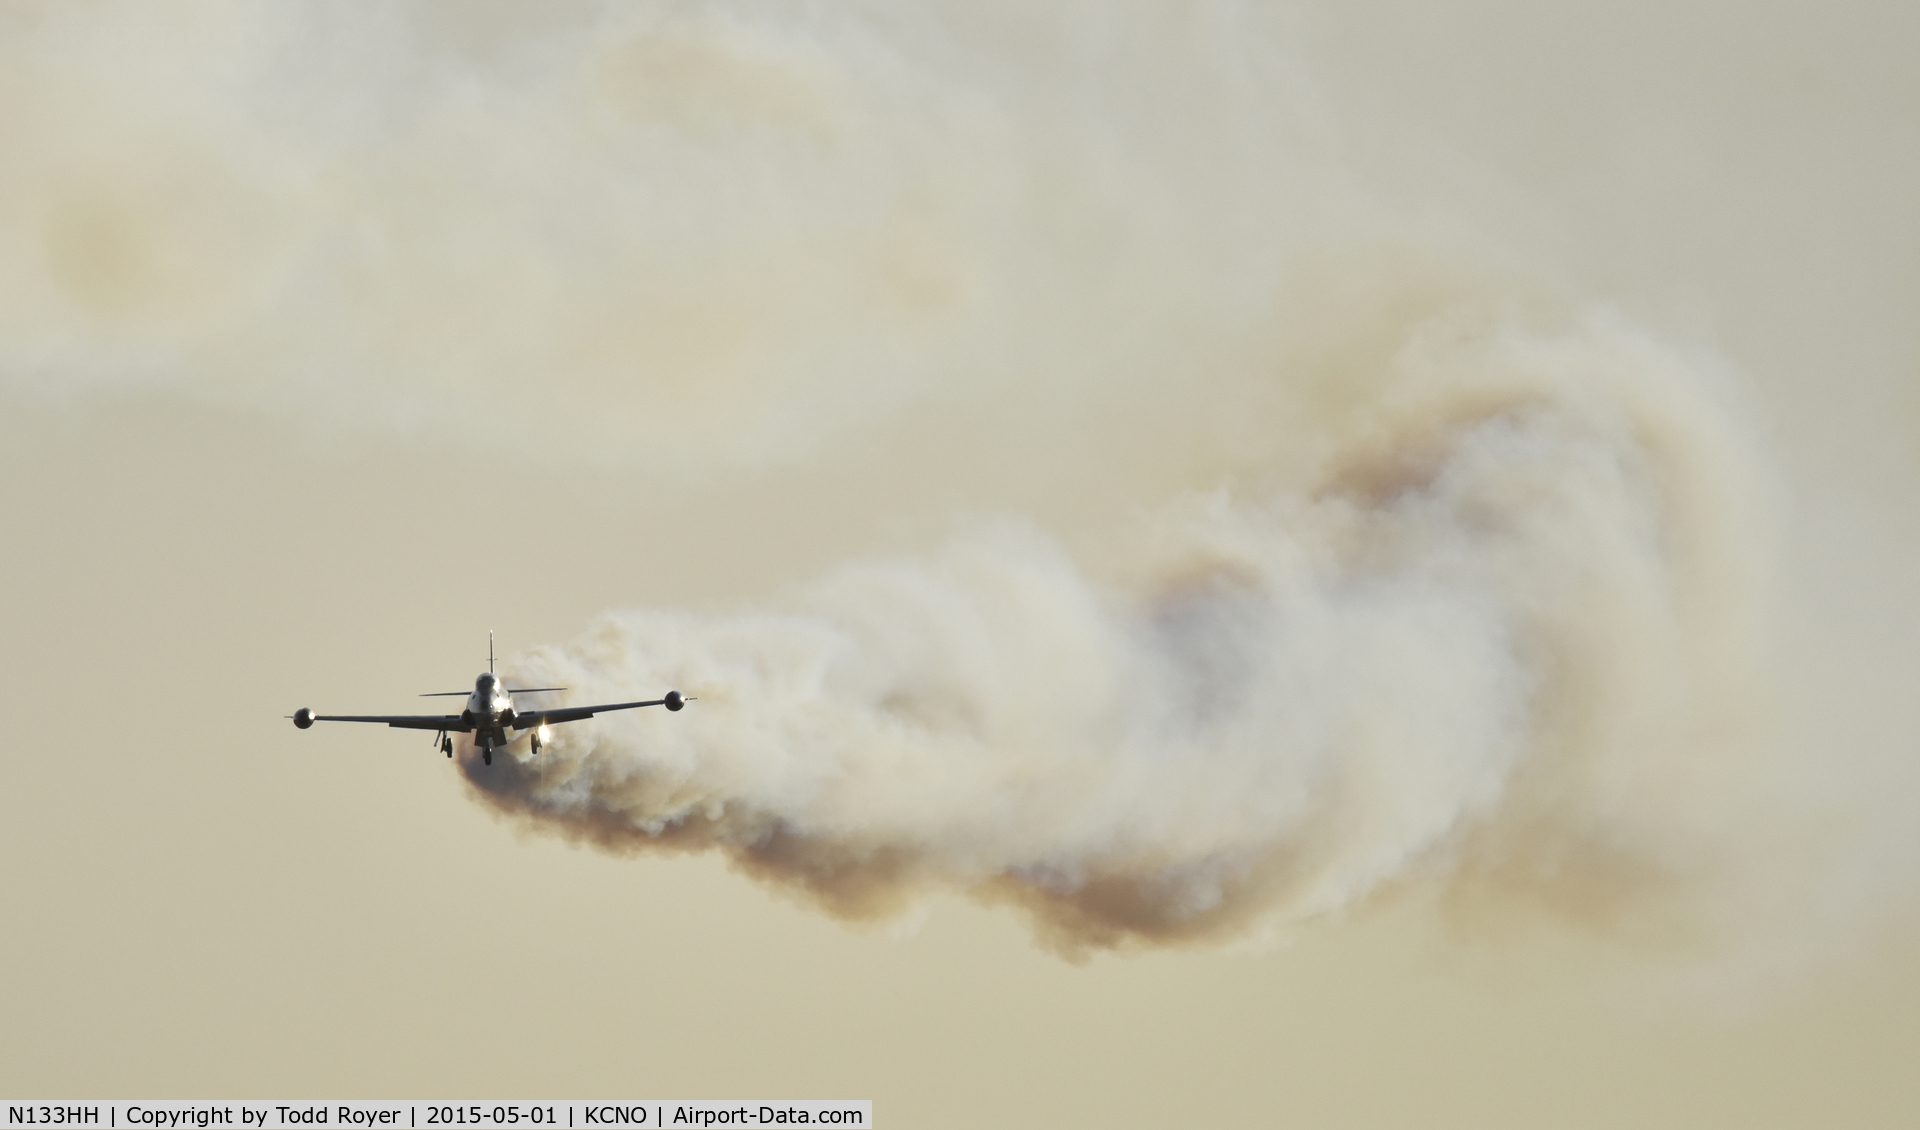 N133HH, Canadair CT-133 Silver Star 3 (CL-30) C/N 133452, Looks serious, but really just show smoke